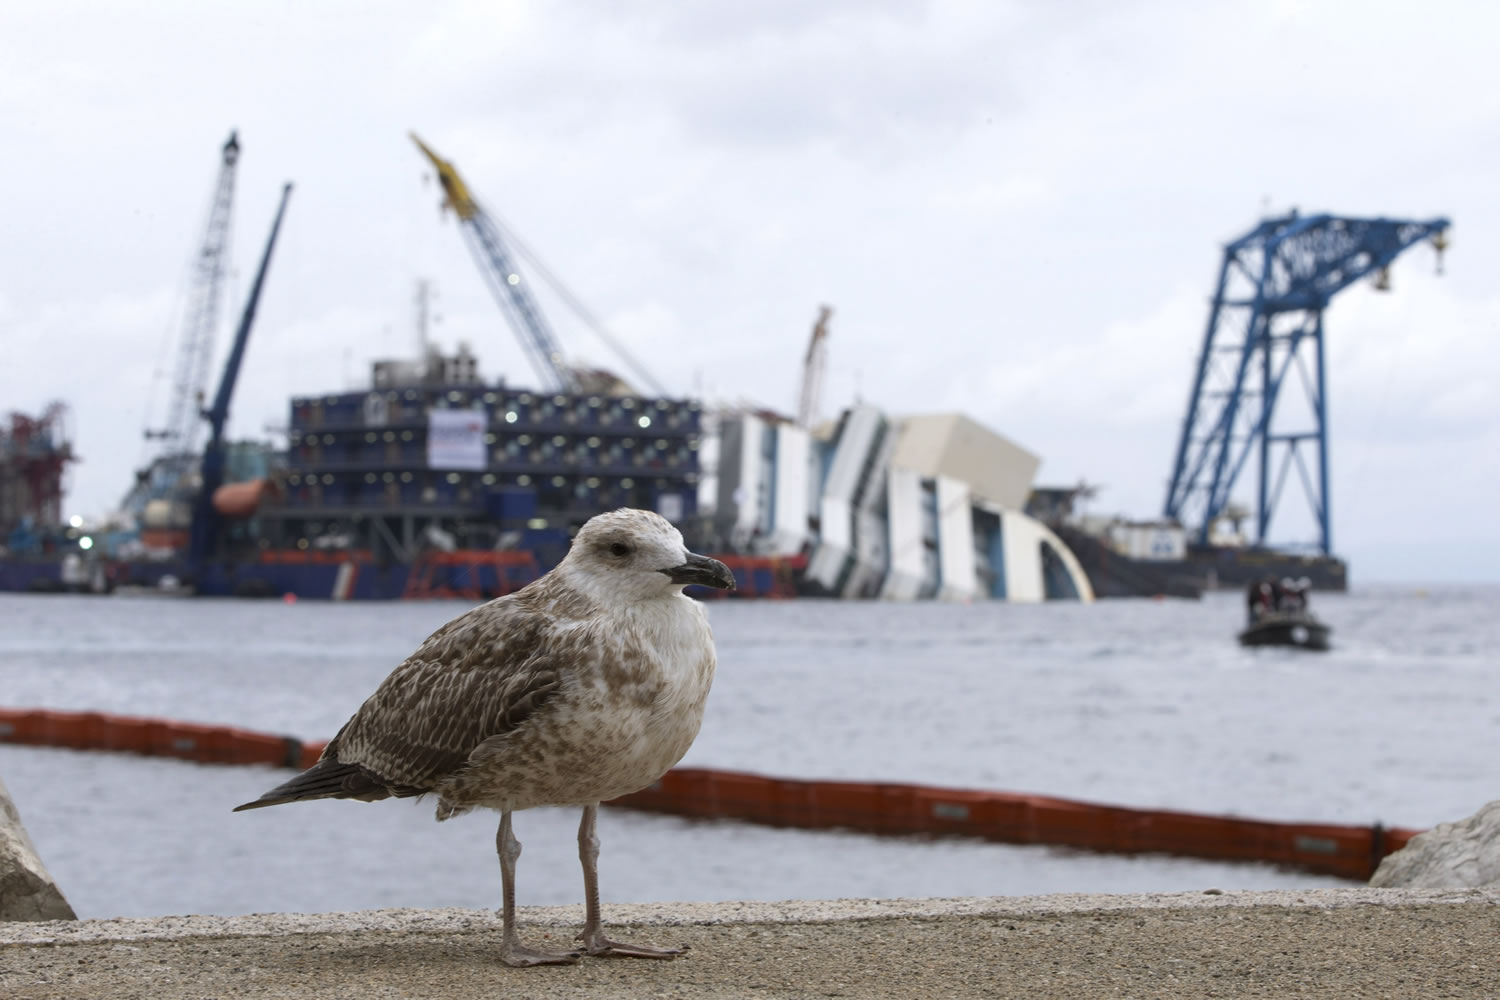 A bird stands in front of the Costa Concordia ship as it lies on its side on the Tuscan Island of Giglio, Italy, on Sunday.